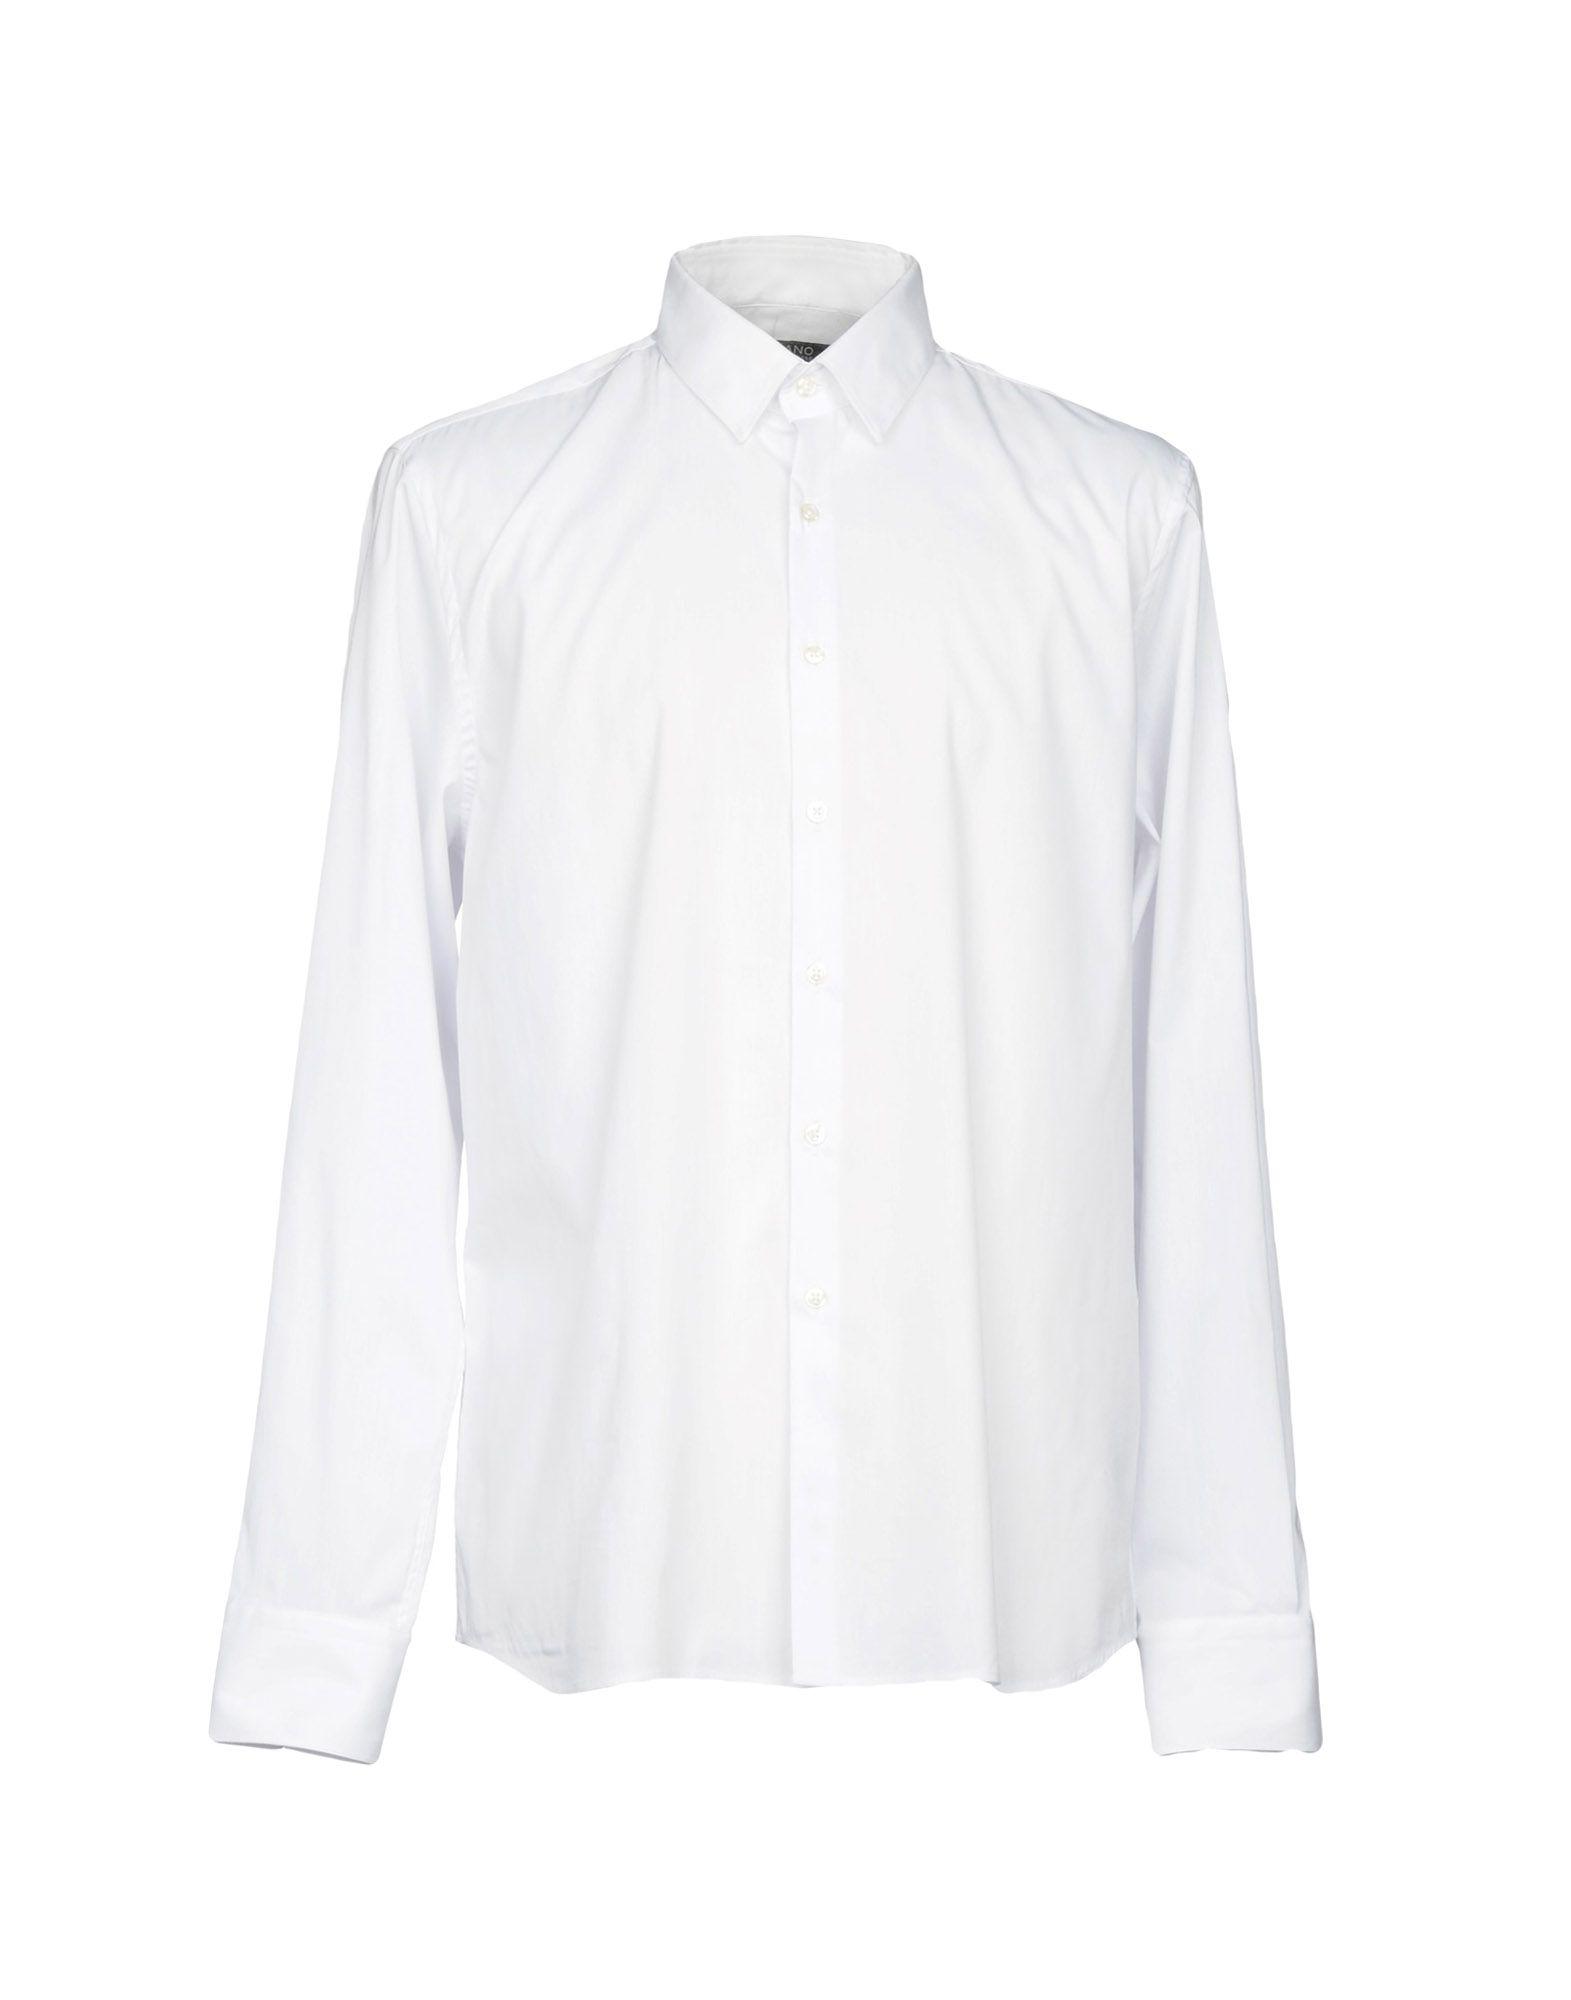 Guess Cotton Shirt in White for Men - Save 7% - Lyst